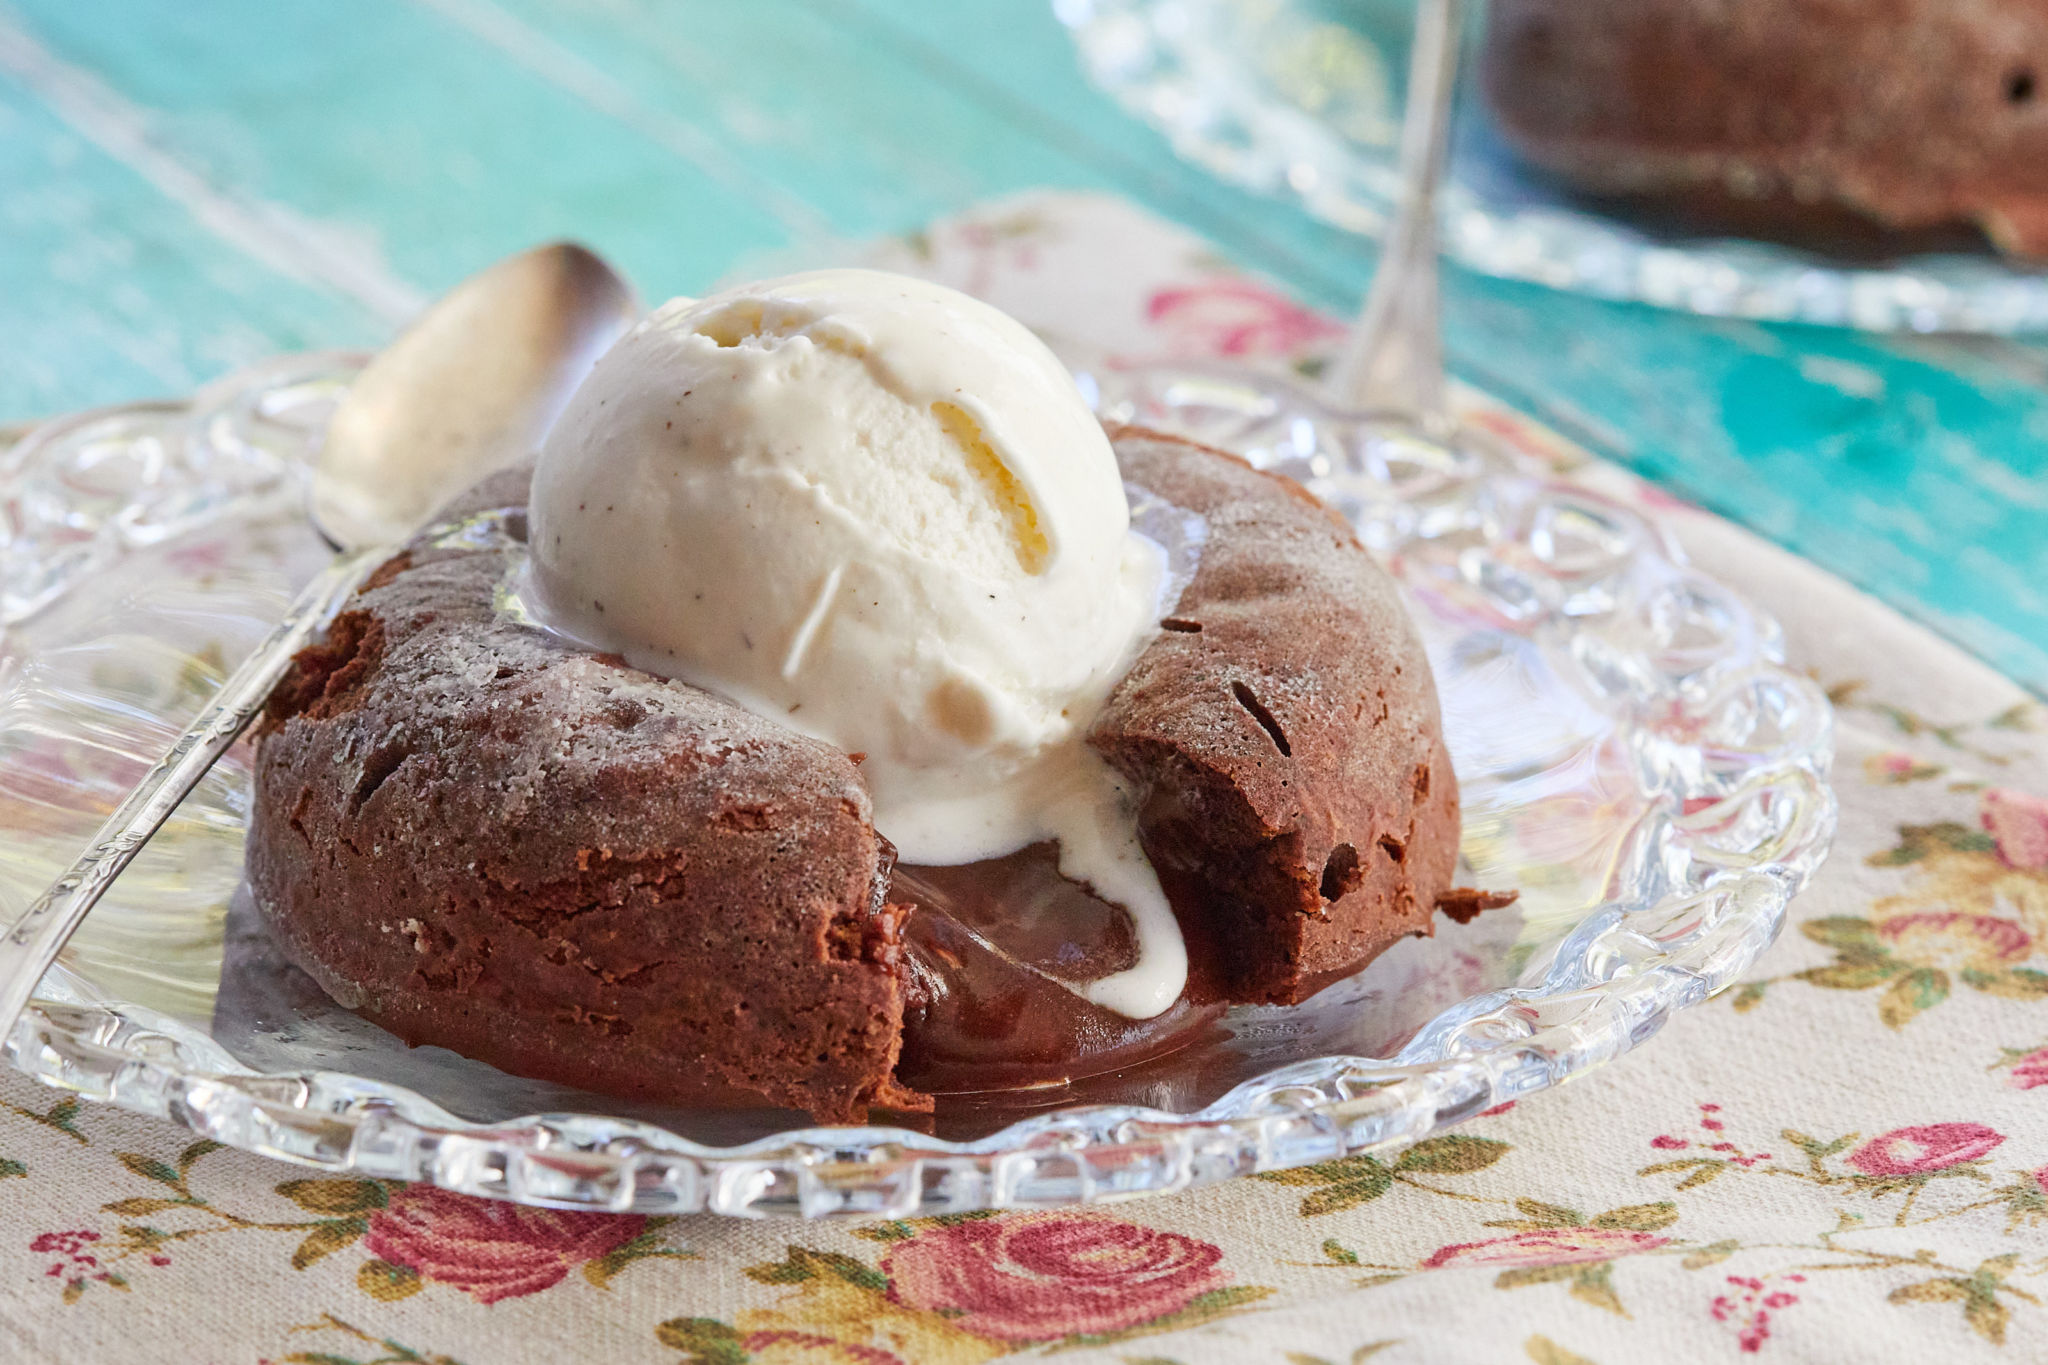 Chocolate Lava Cake for 2 recipe for Valentine's Day dessert, topped with ice cream!